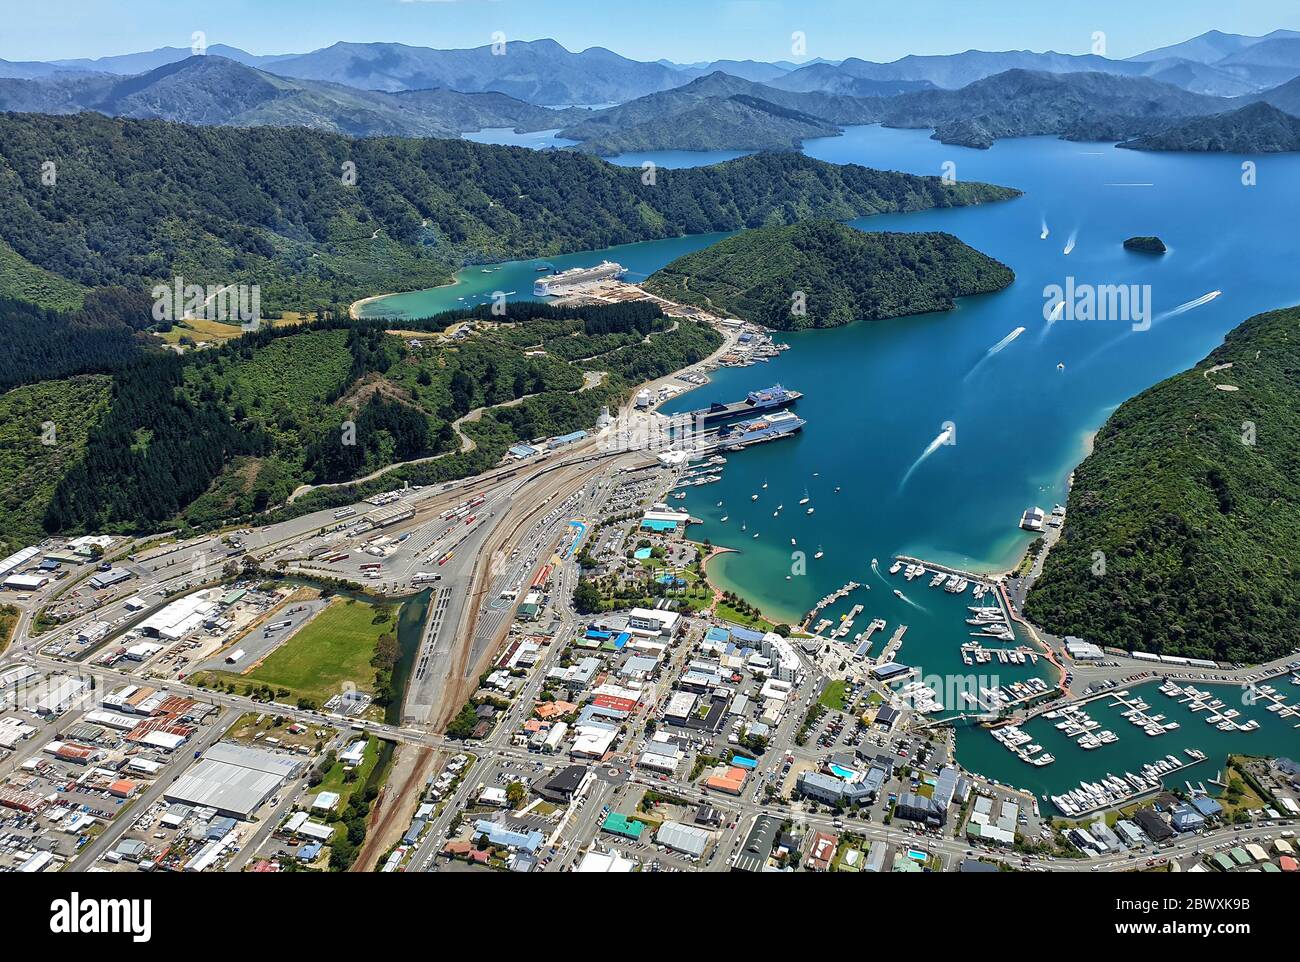 Aerial view of Picton, Marlborough Sounds, South Island, New Zealand, Oceania. Stock Photo